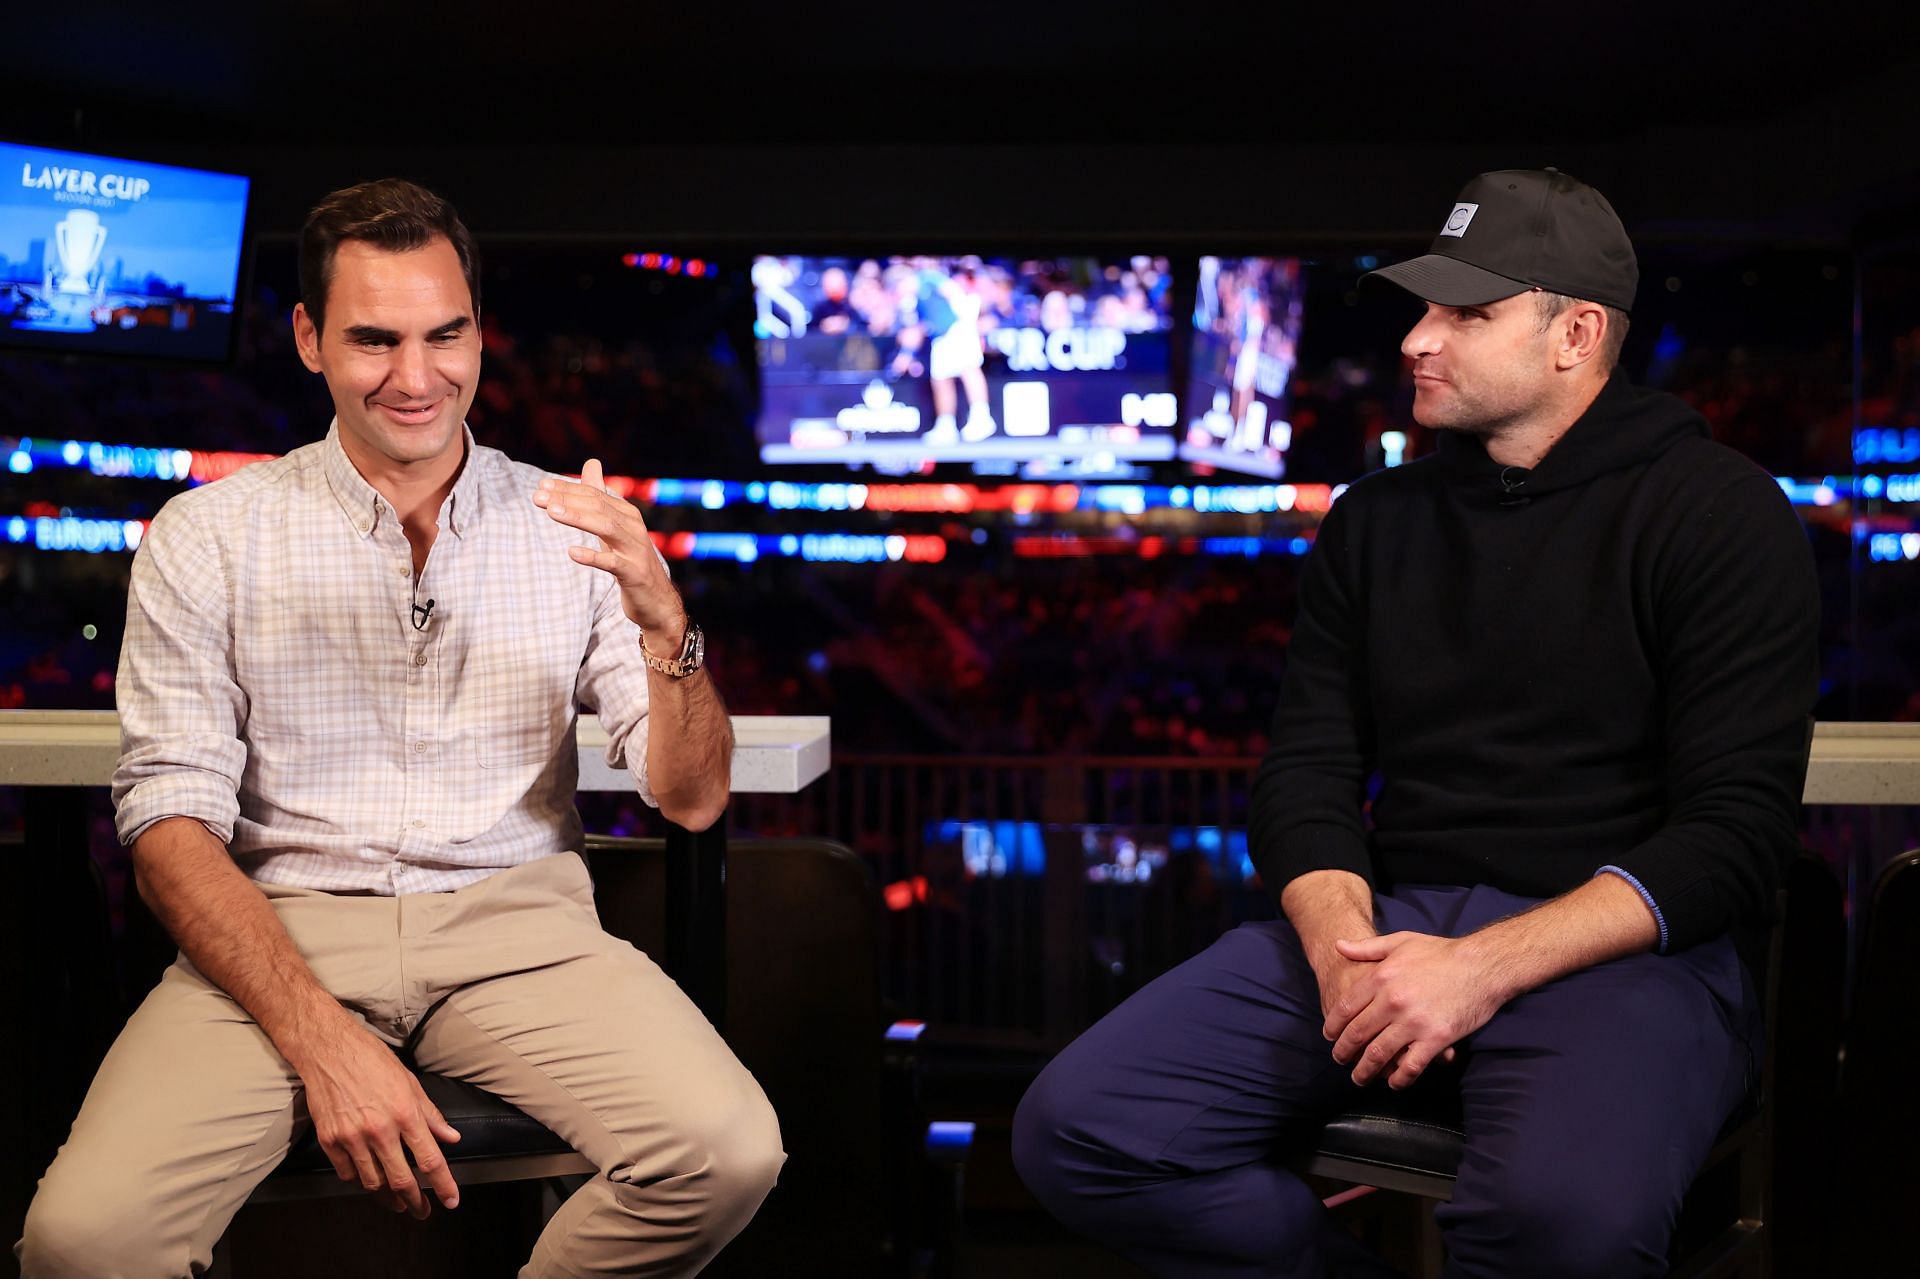 Andy Roddick and Roger Federer at the 2021 Laver Cup.